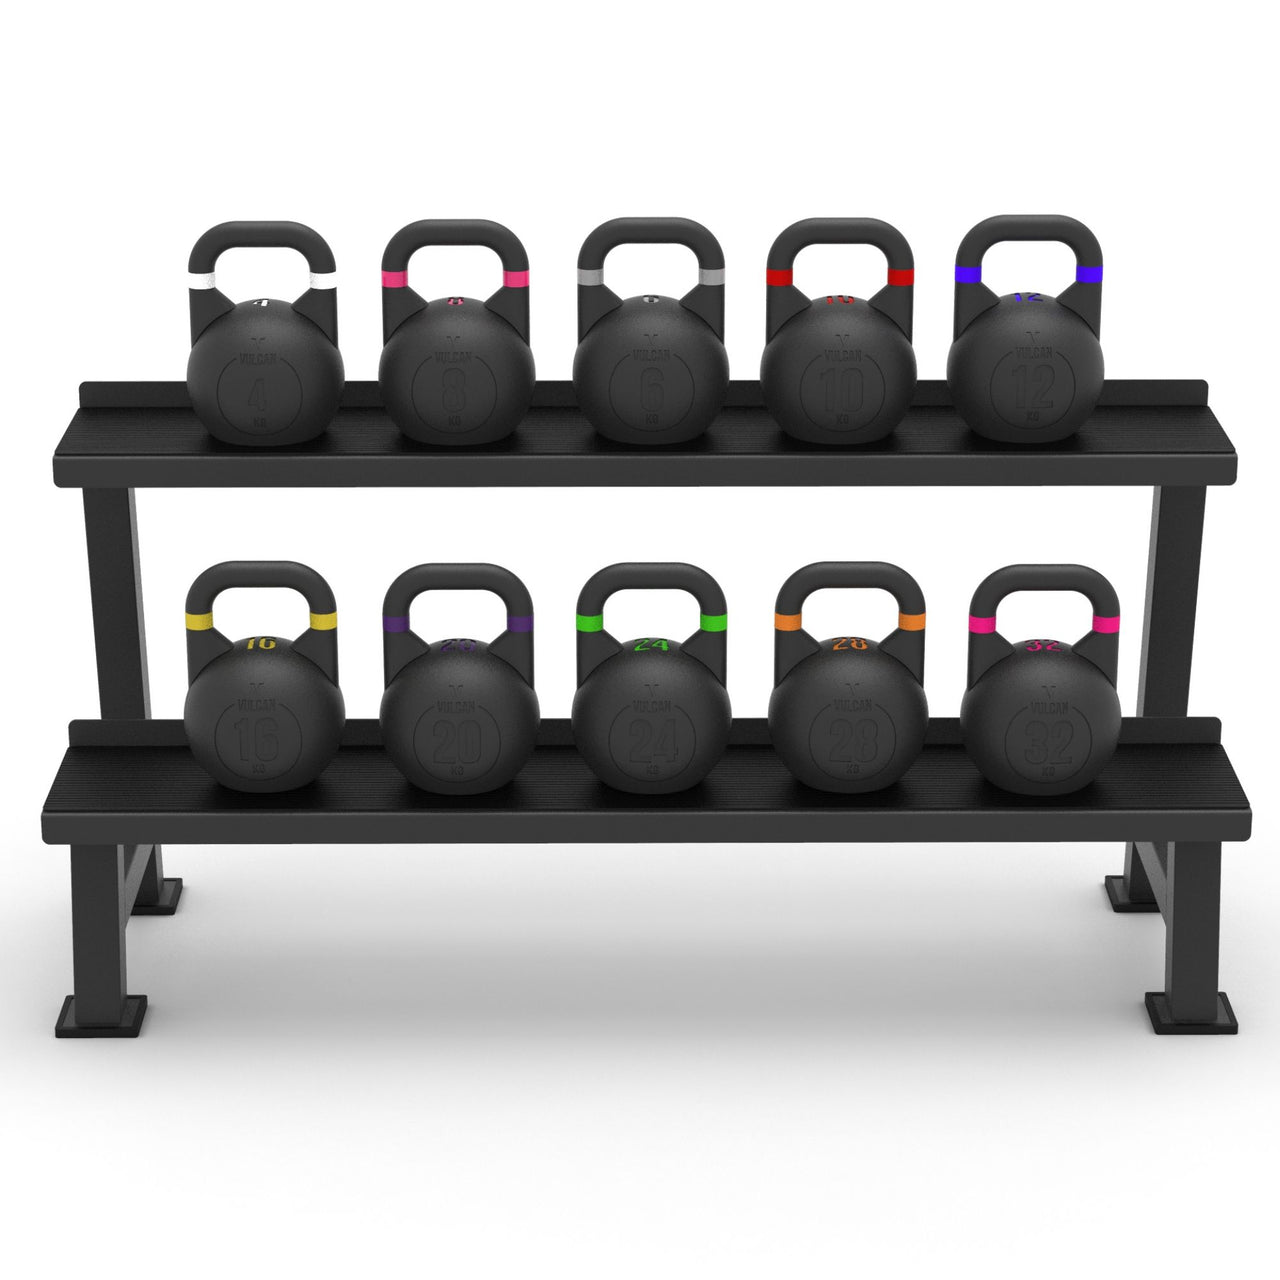 VULCAN Competition Kettlebells 4kg ~ 32kg & Commercial Storage 2 Tier | IN STOCK